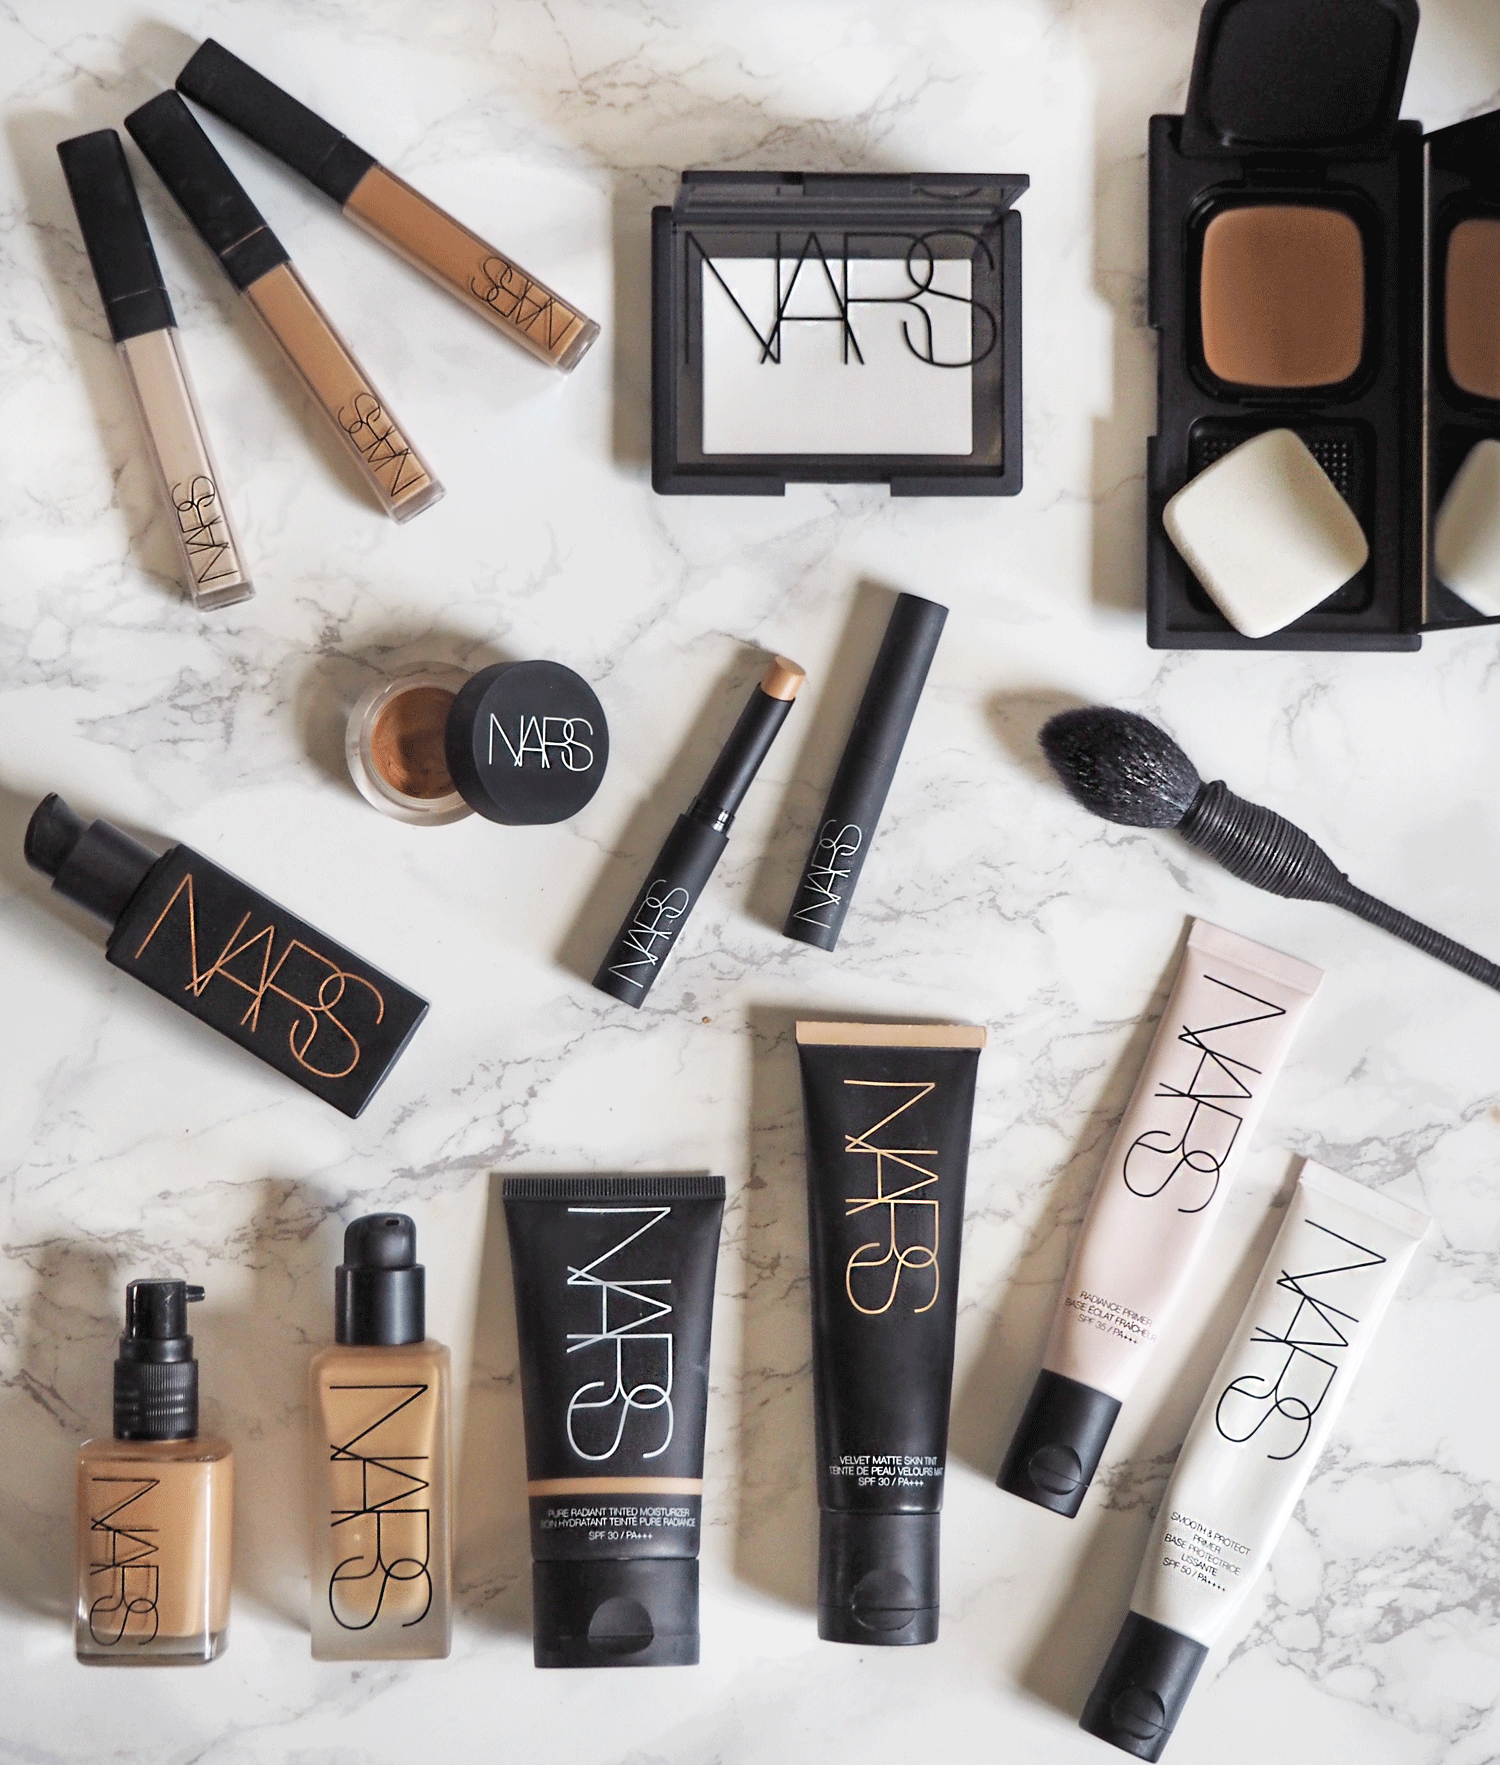 kode Meyella Bliv ophidset NARS Makeup : The Ultimate Guide to Foundation & Base. - Laura Louise Makeup  + Beauty